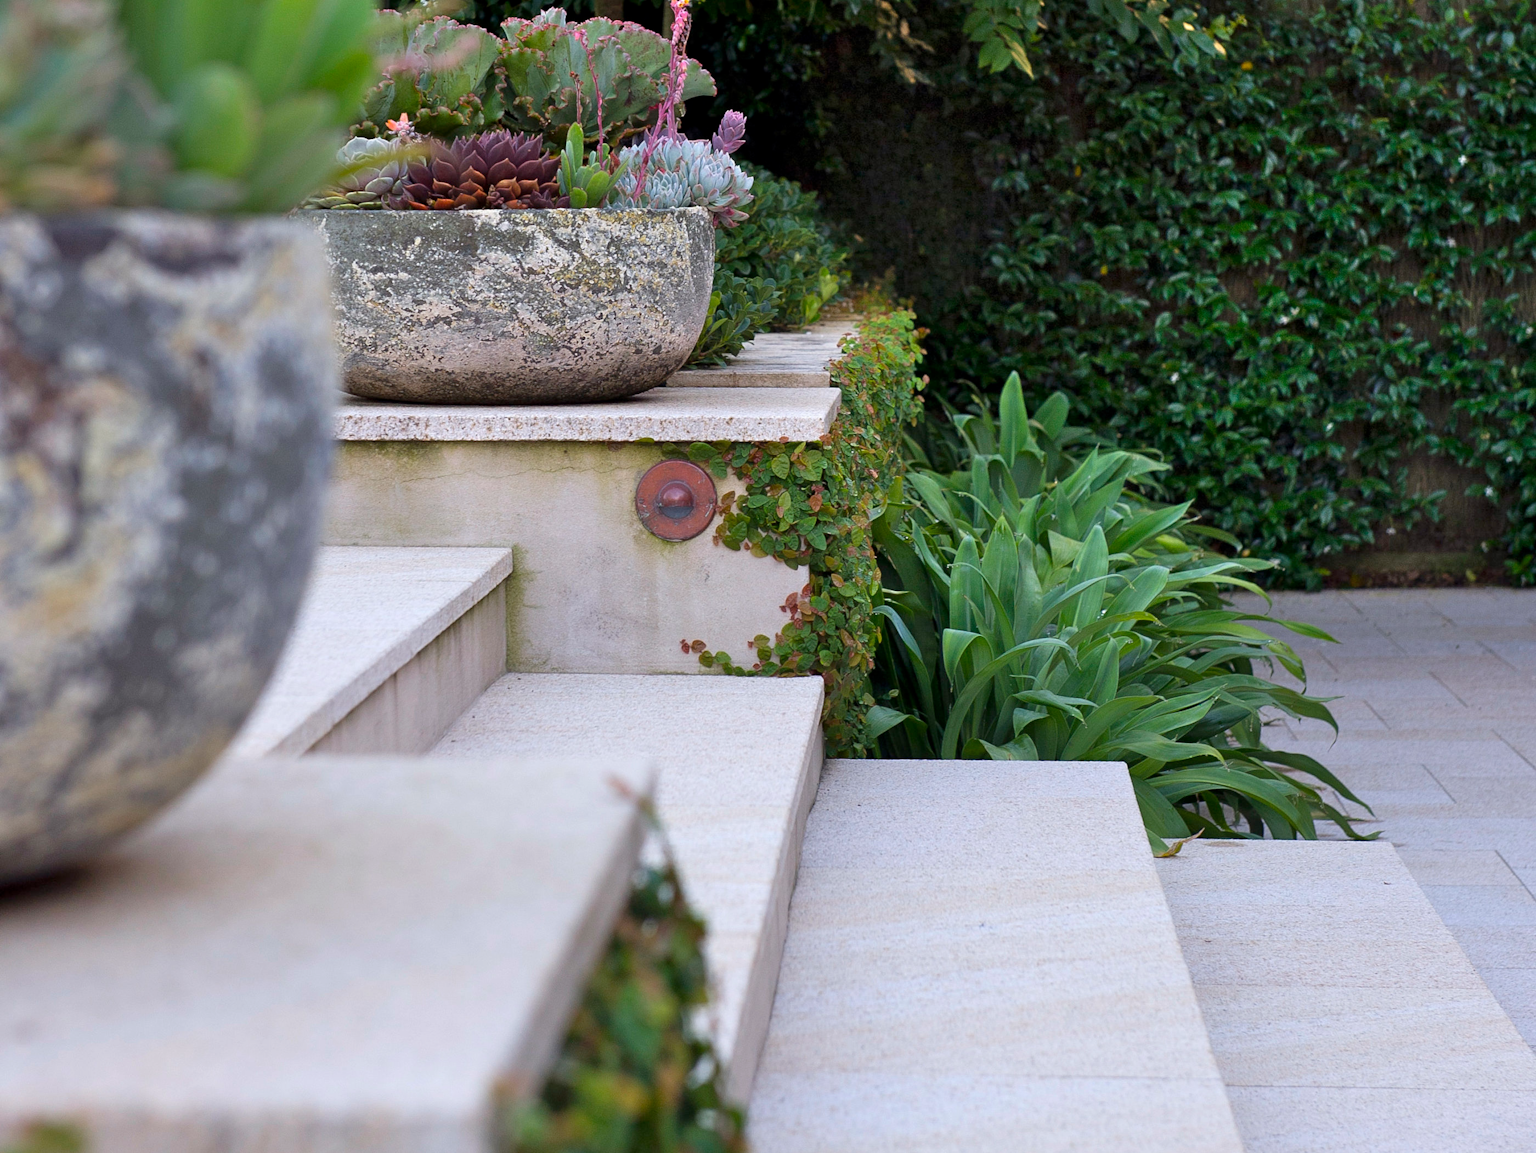 Stairs in Tortoise granite paving with retaining walls also capped in Tortoise granite